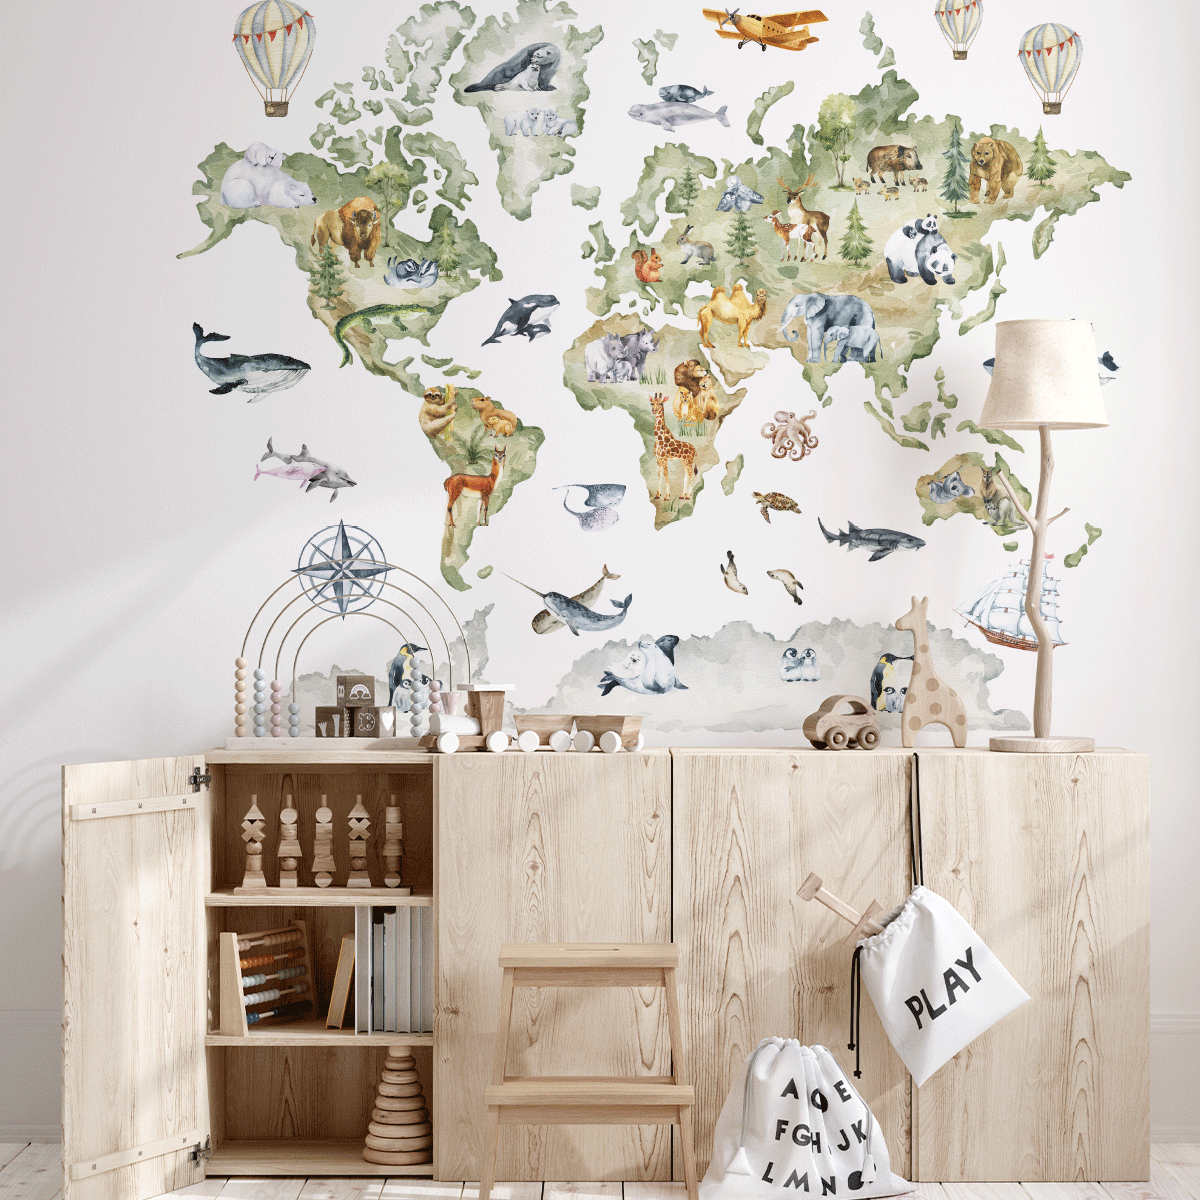 world map wall stickers, world map wall decals, animal world map wall stickers